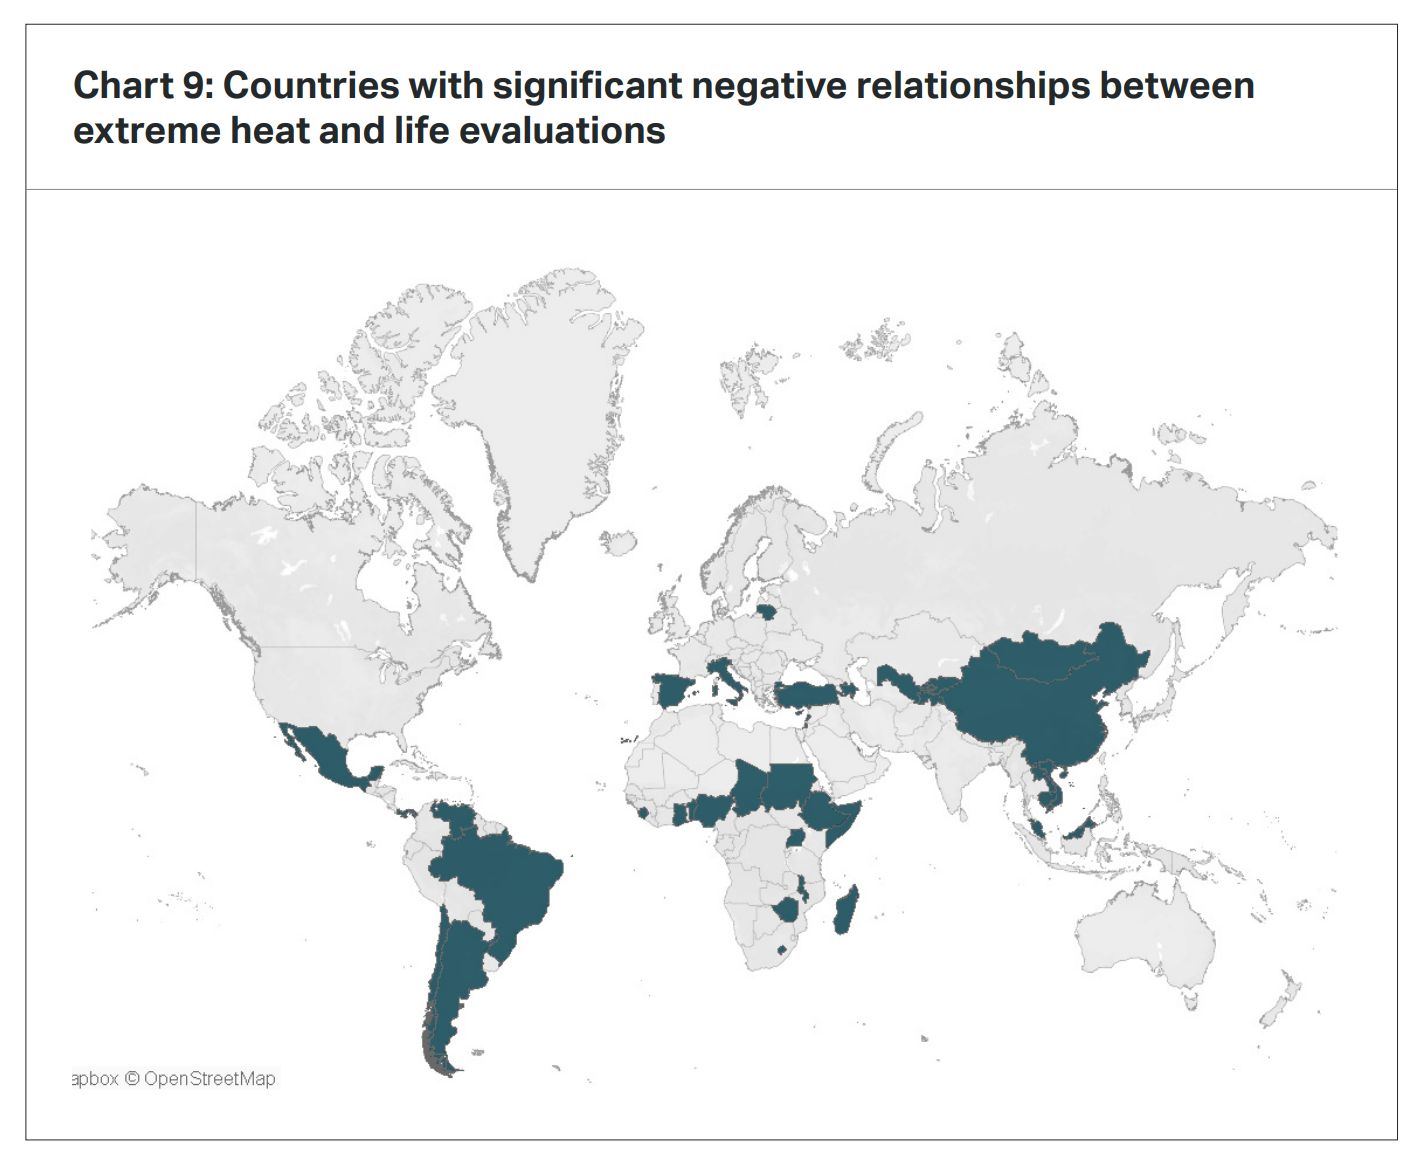 Countries with significant negative relationships between extreme heat and life evaluations. A range of statistical models using different parameters and control variables consistently find significant negative relationships between extreme heat and life evaluations in 37 predominantly low- and middle-income countries. In addition to the five listed above, this group includes Argentina, Azerbaijan, Bahrain, Benin, Cambodia, Chad, Chile, Cyprus, Ethiopia, Ghana, Italy, Kyrgyzstan, Laos, Lebanon, Lesotho, Lithuania, Madagascar, Malawi, Malaysia, Mongolia, Palestine, Panama, Sierra Leone, Somalia, Spain, Sudan, Tajikistan, Uganda, Uzbekistan, Venezuela, Vietnam and Zimbabwe. The combined population of these 37 countries represents more than a third of the global population. Graphic: Gallup